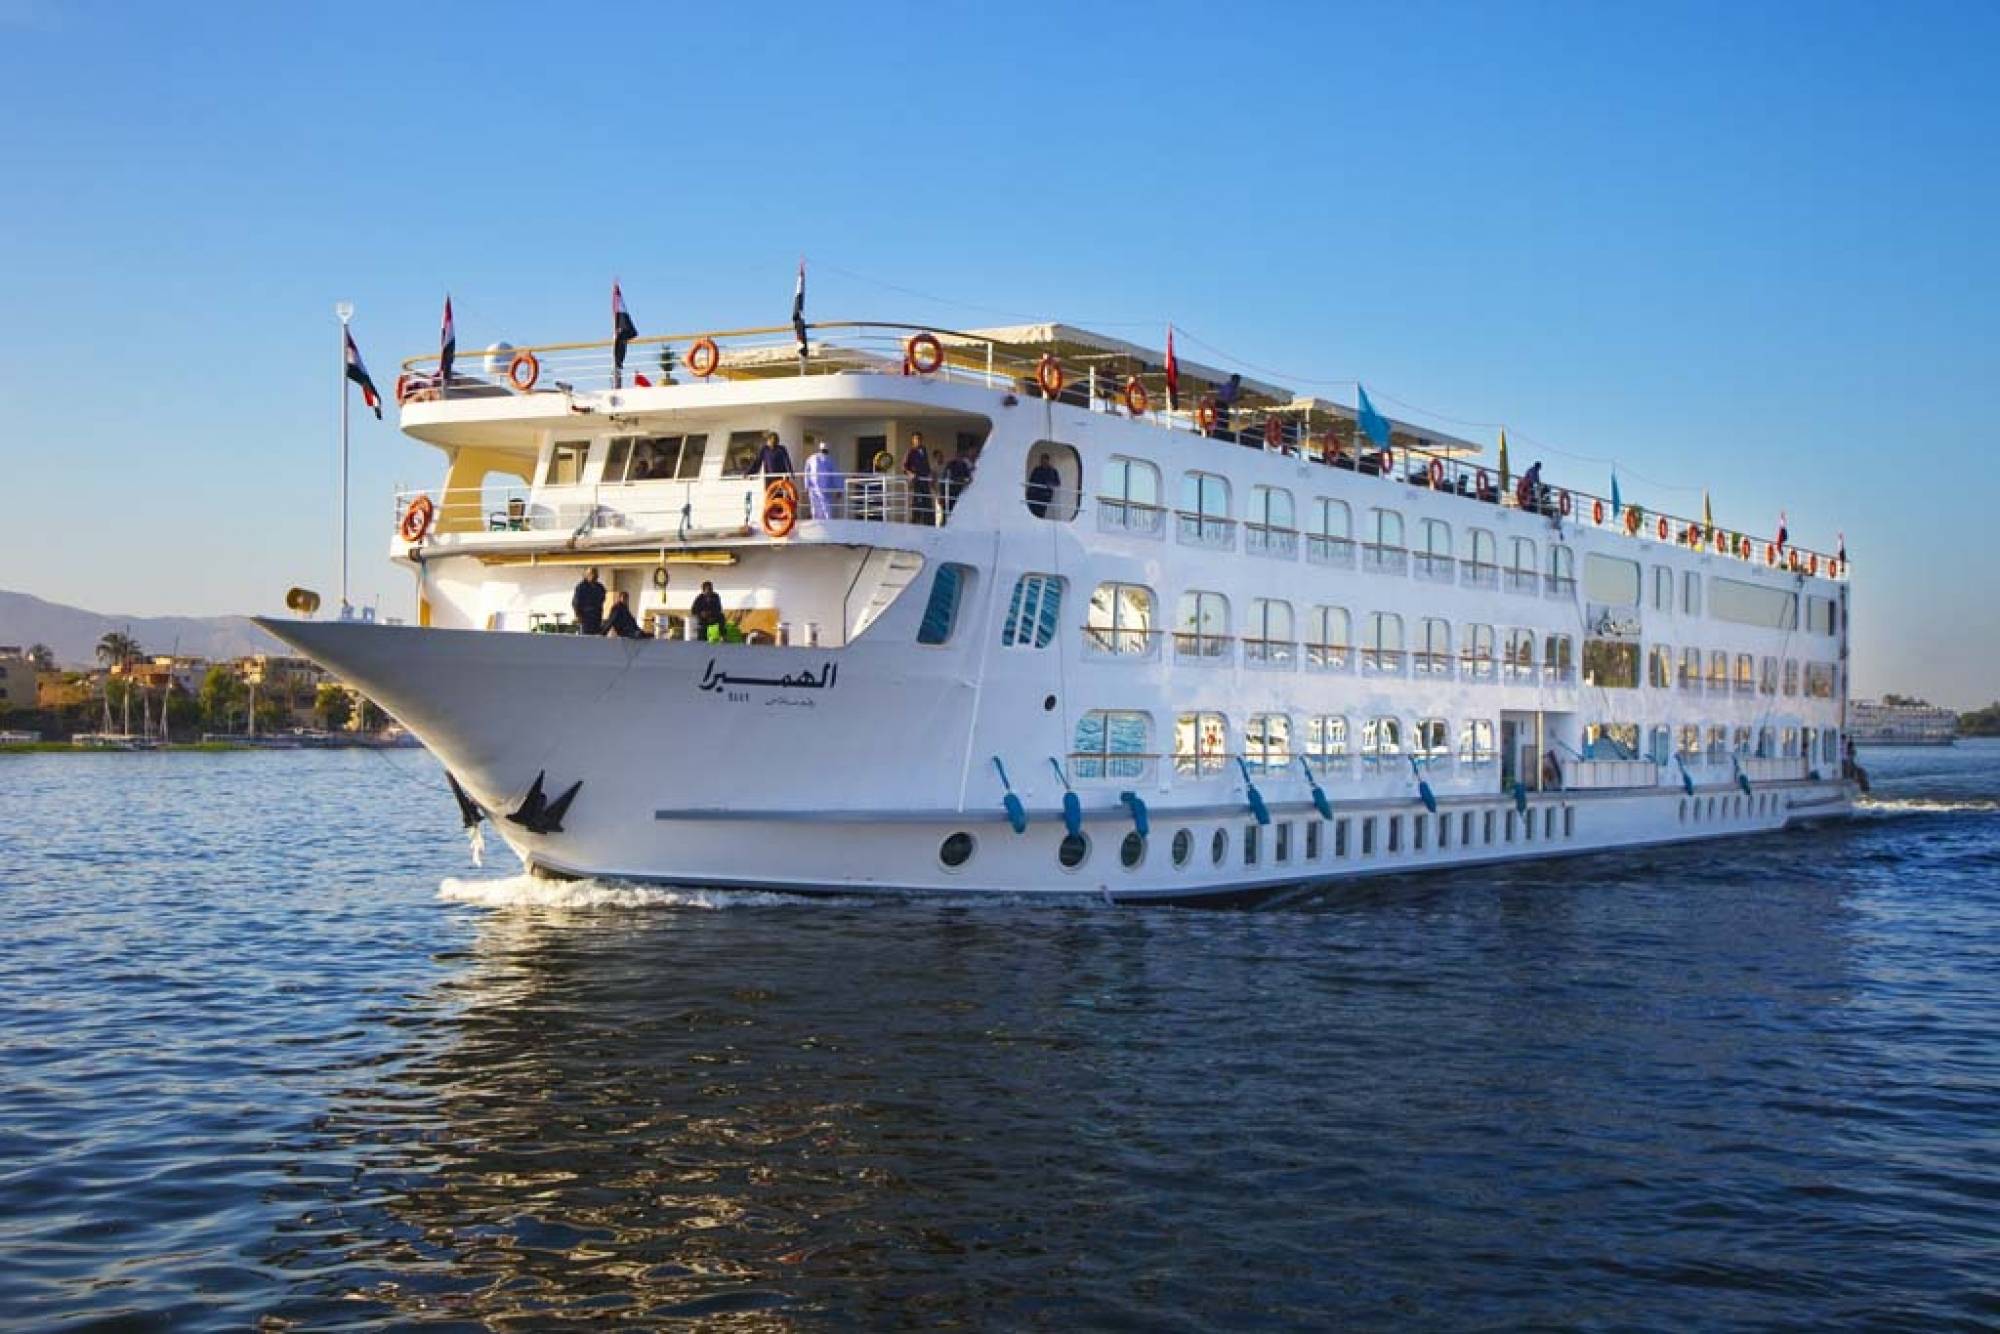 11 Nile cruise lines reopen in Luxor and Aswan after obtaining health